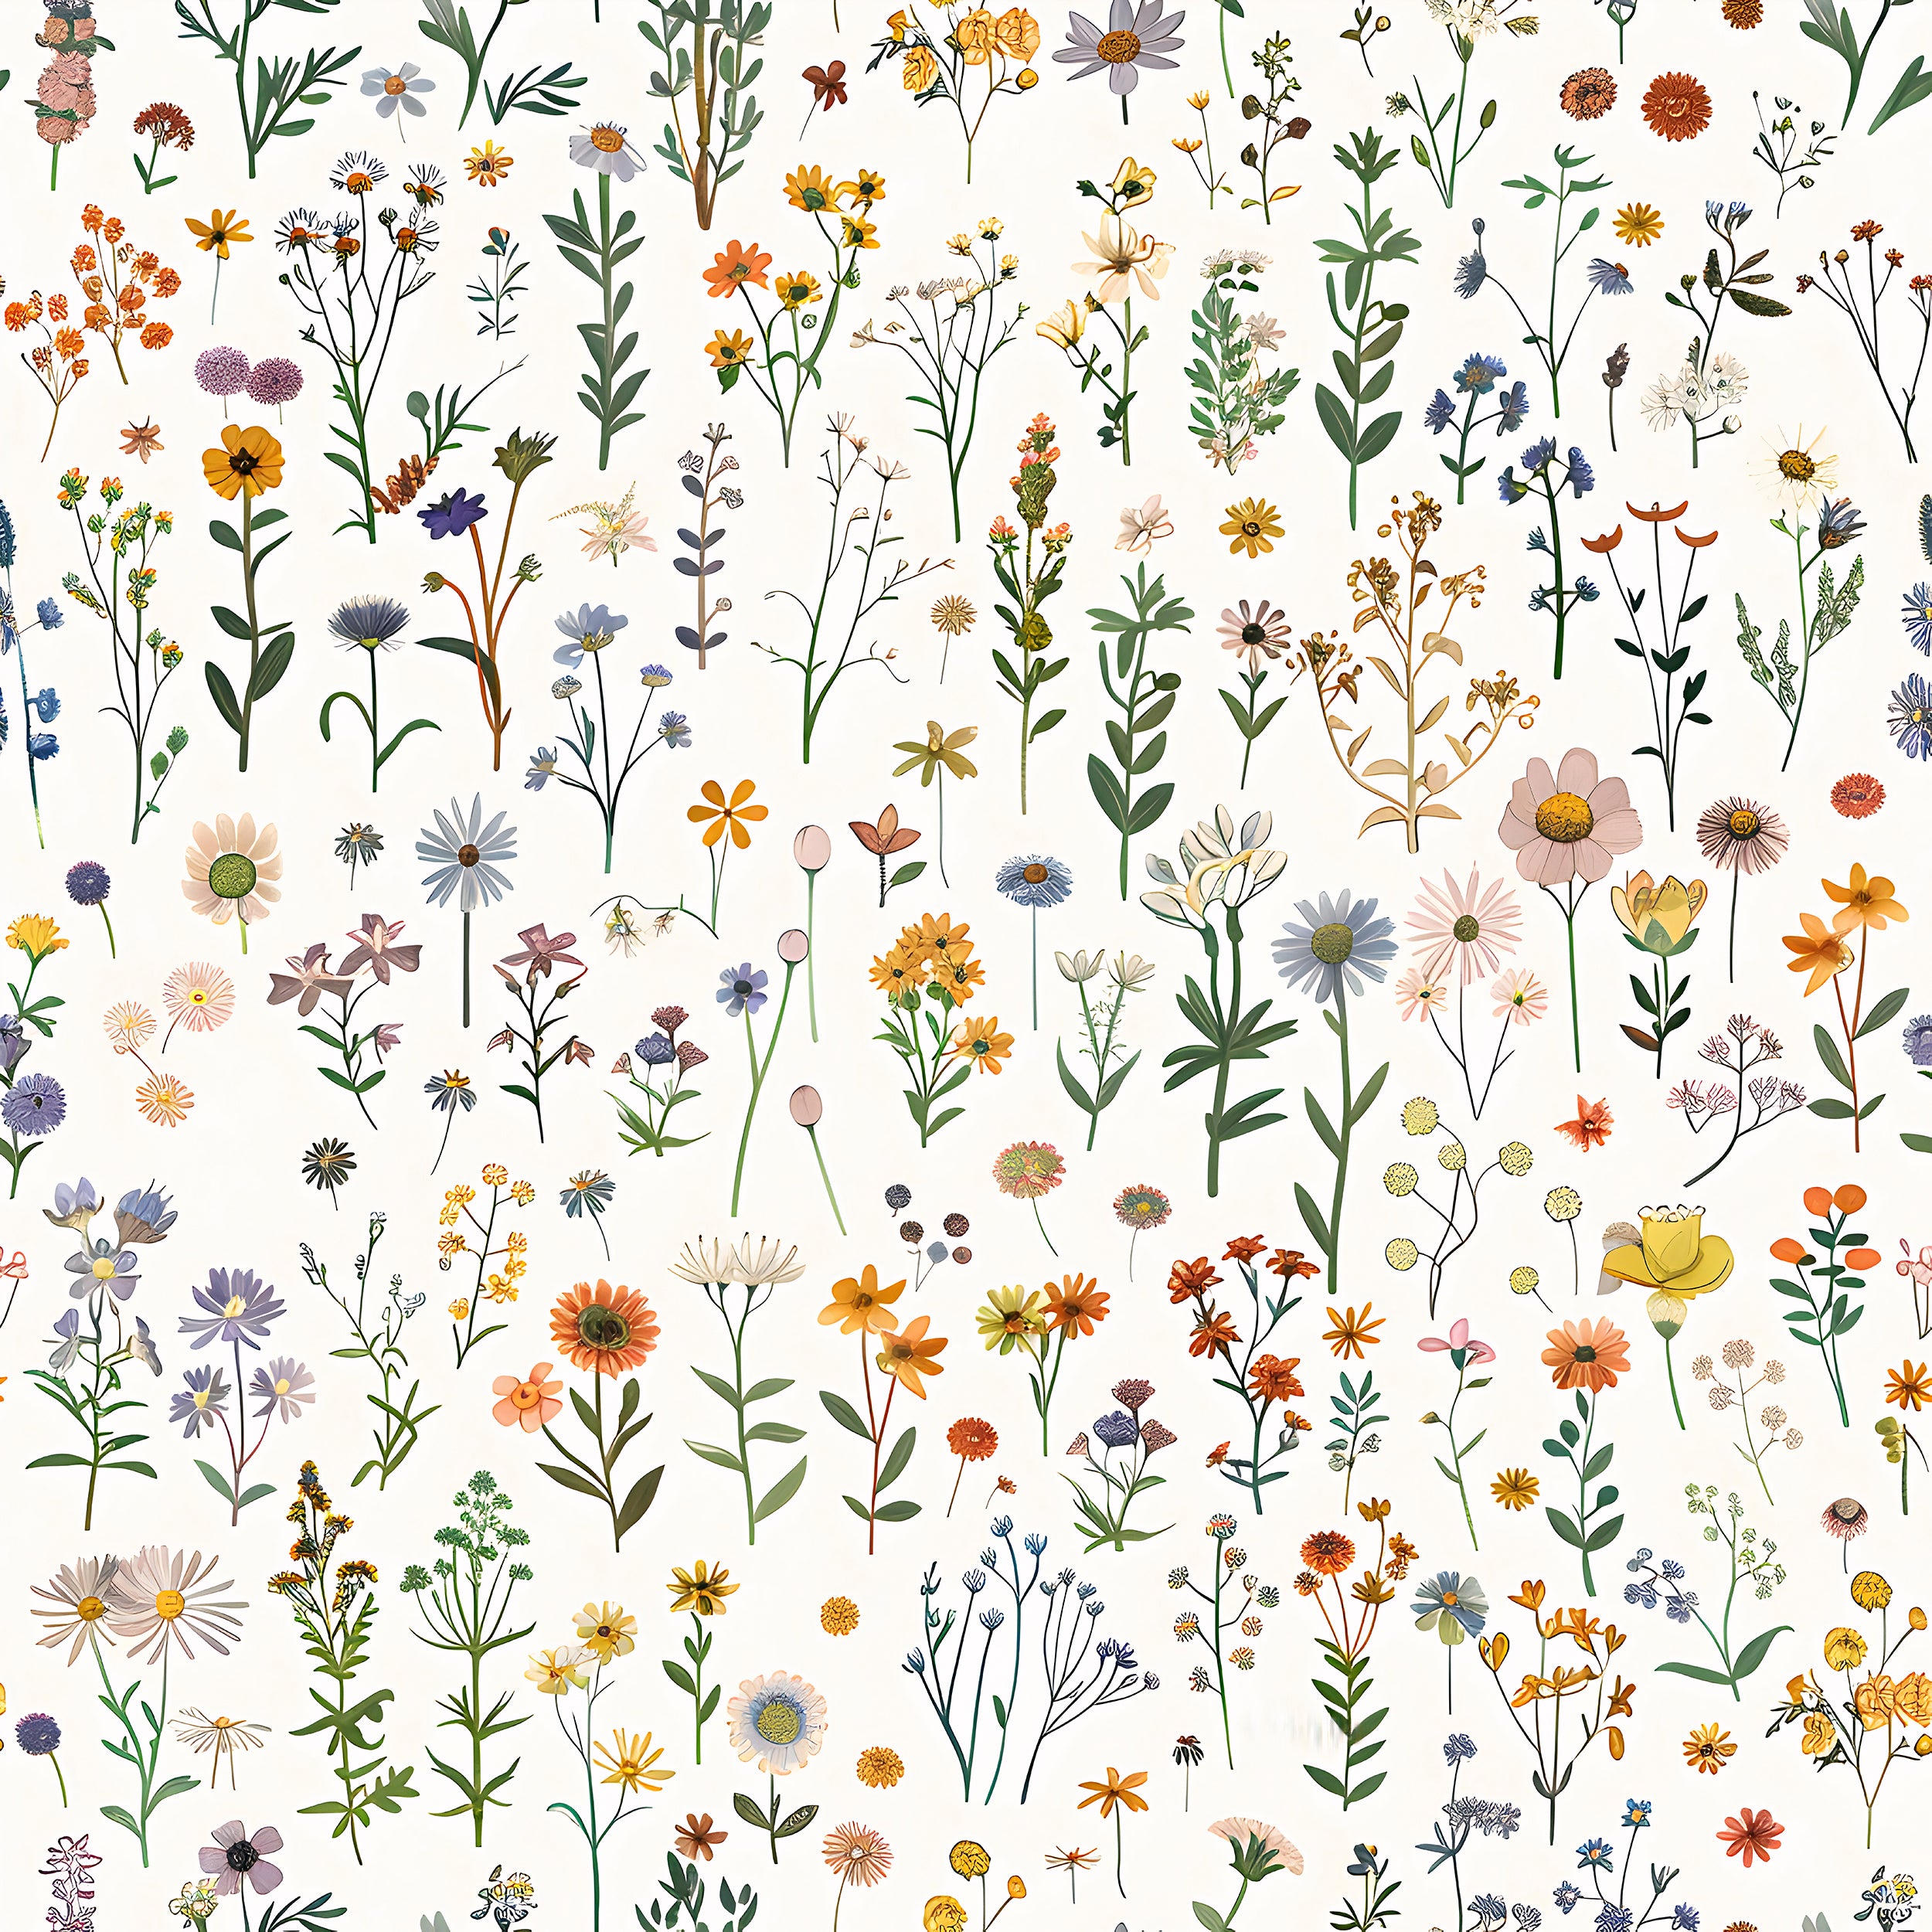 Colorful Meadow Flowers Wallpaper, Self-adhesive Light Floral Wall Decor, Removable Small Flower Pattern Wallpaper, Minimalistic Botanical Decal